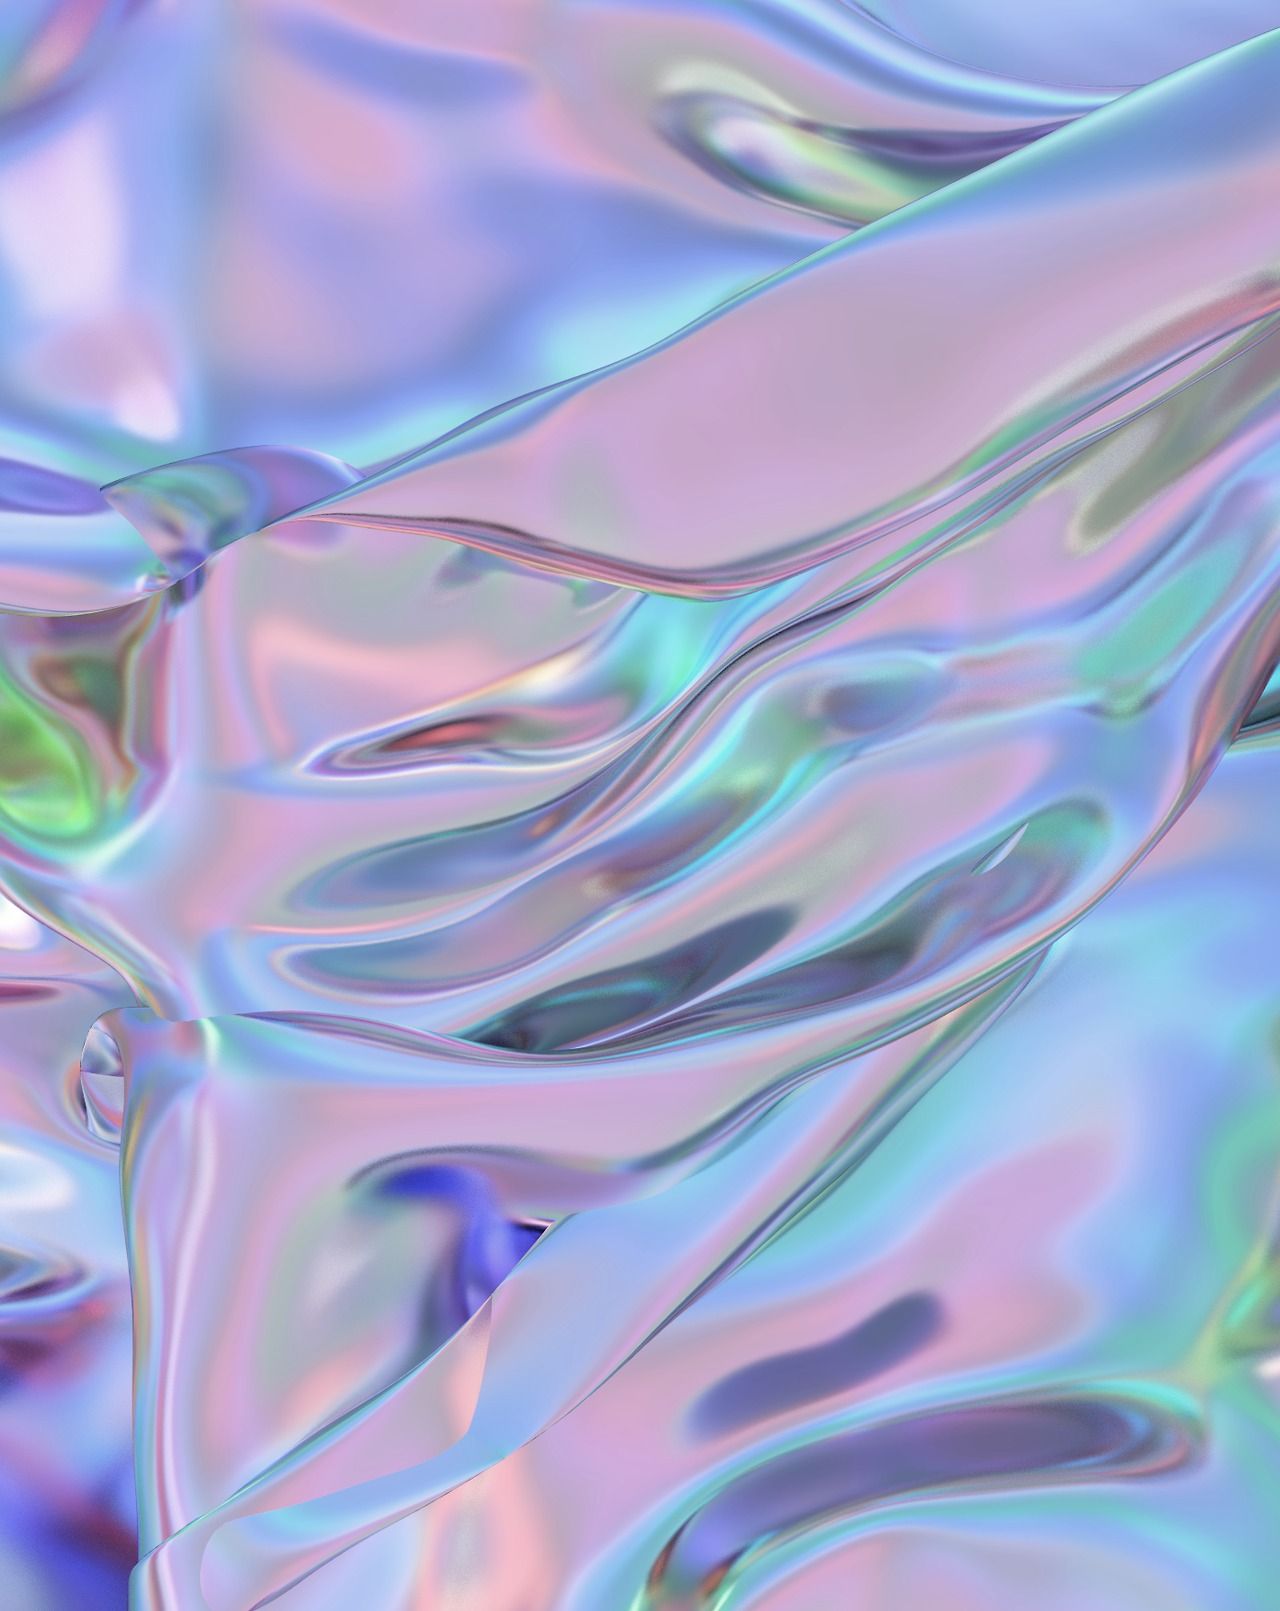 Holographic Water - HD Wallpaper 